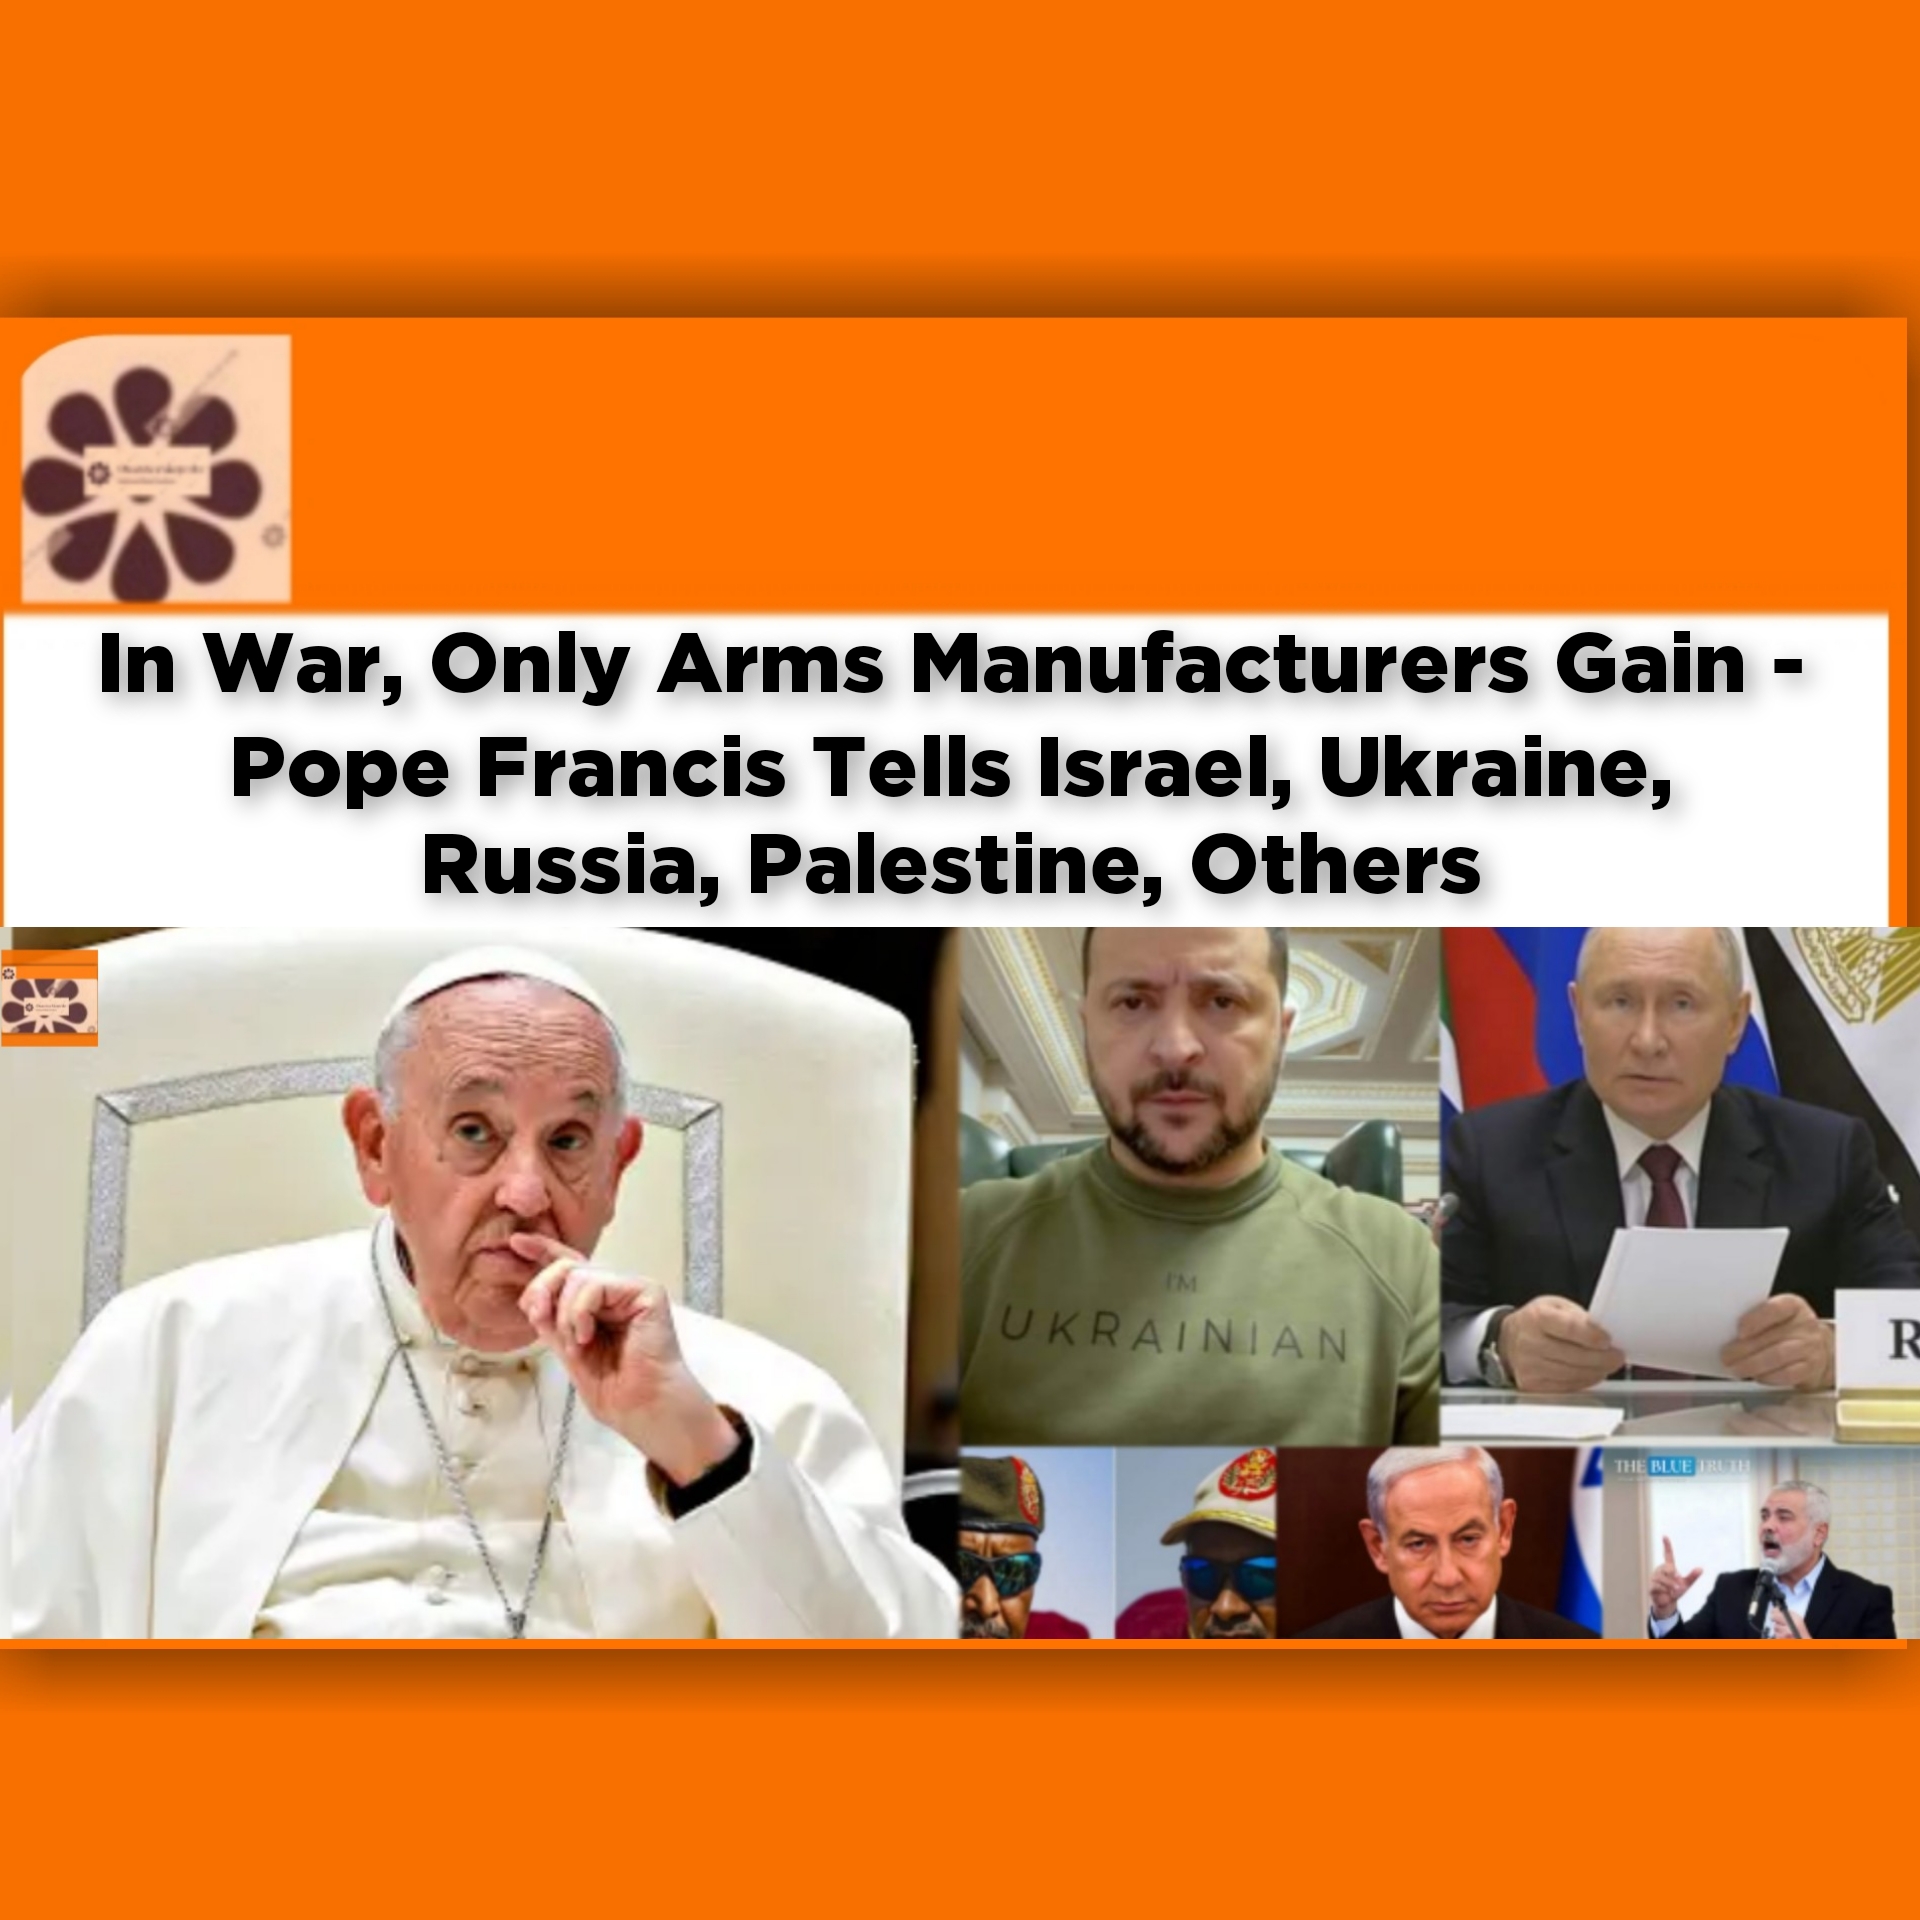 In War, Only Arms Manufacturers Gain - Pope Francis Tells Israel, Ukraine, Russia, Palestine, Others ~ OsazuwaAkonedo #Mohammed